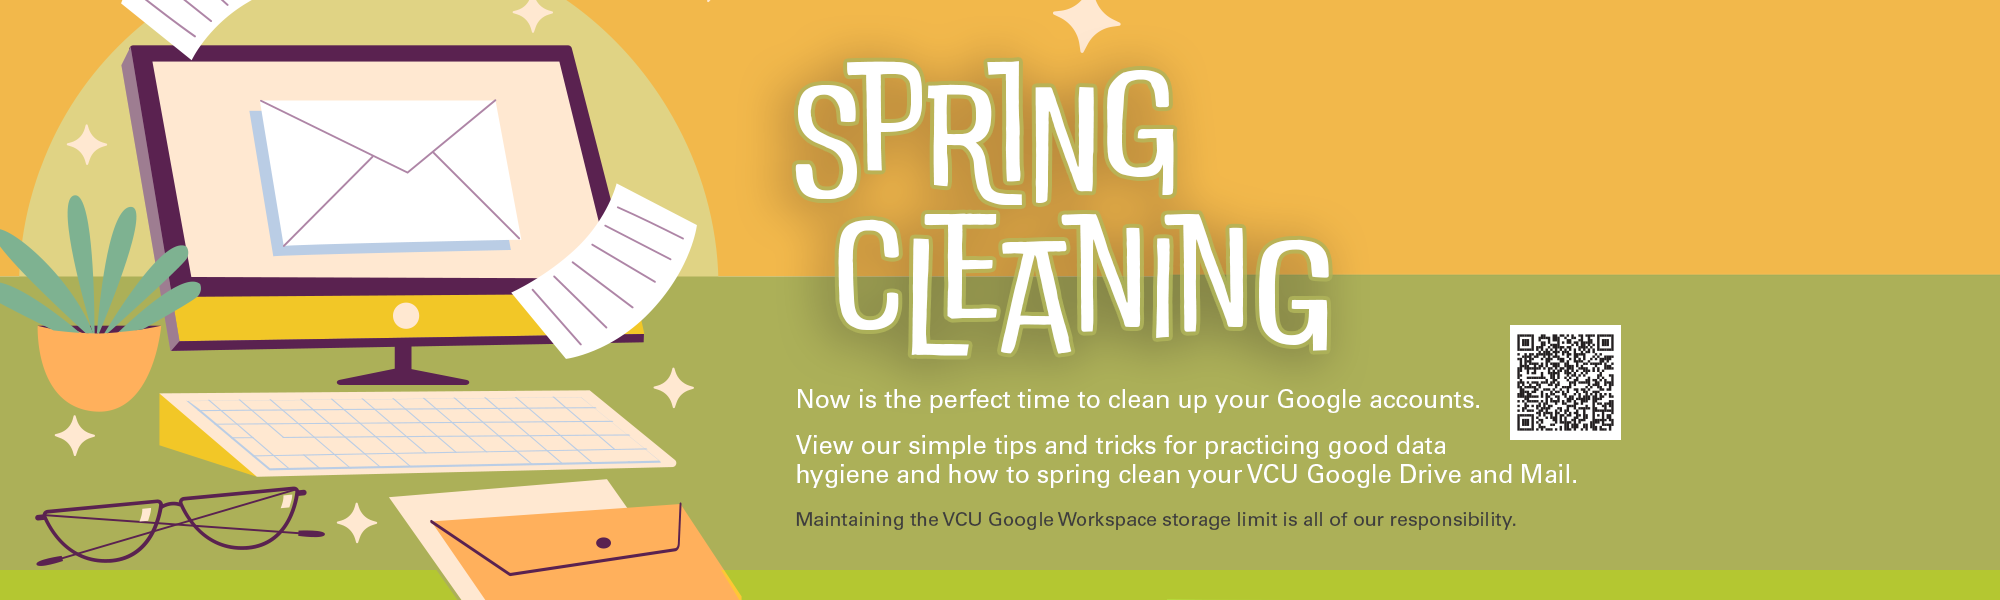 Google Spring Cleaning